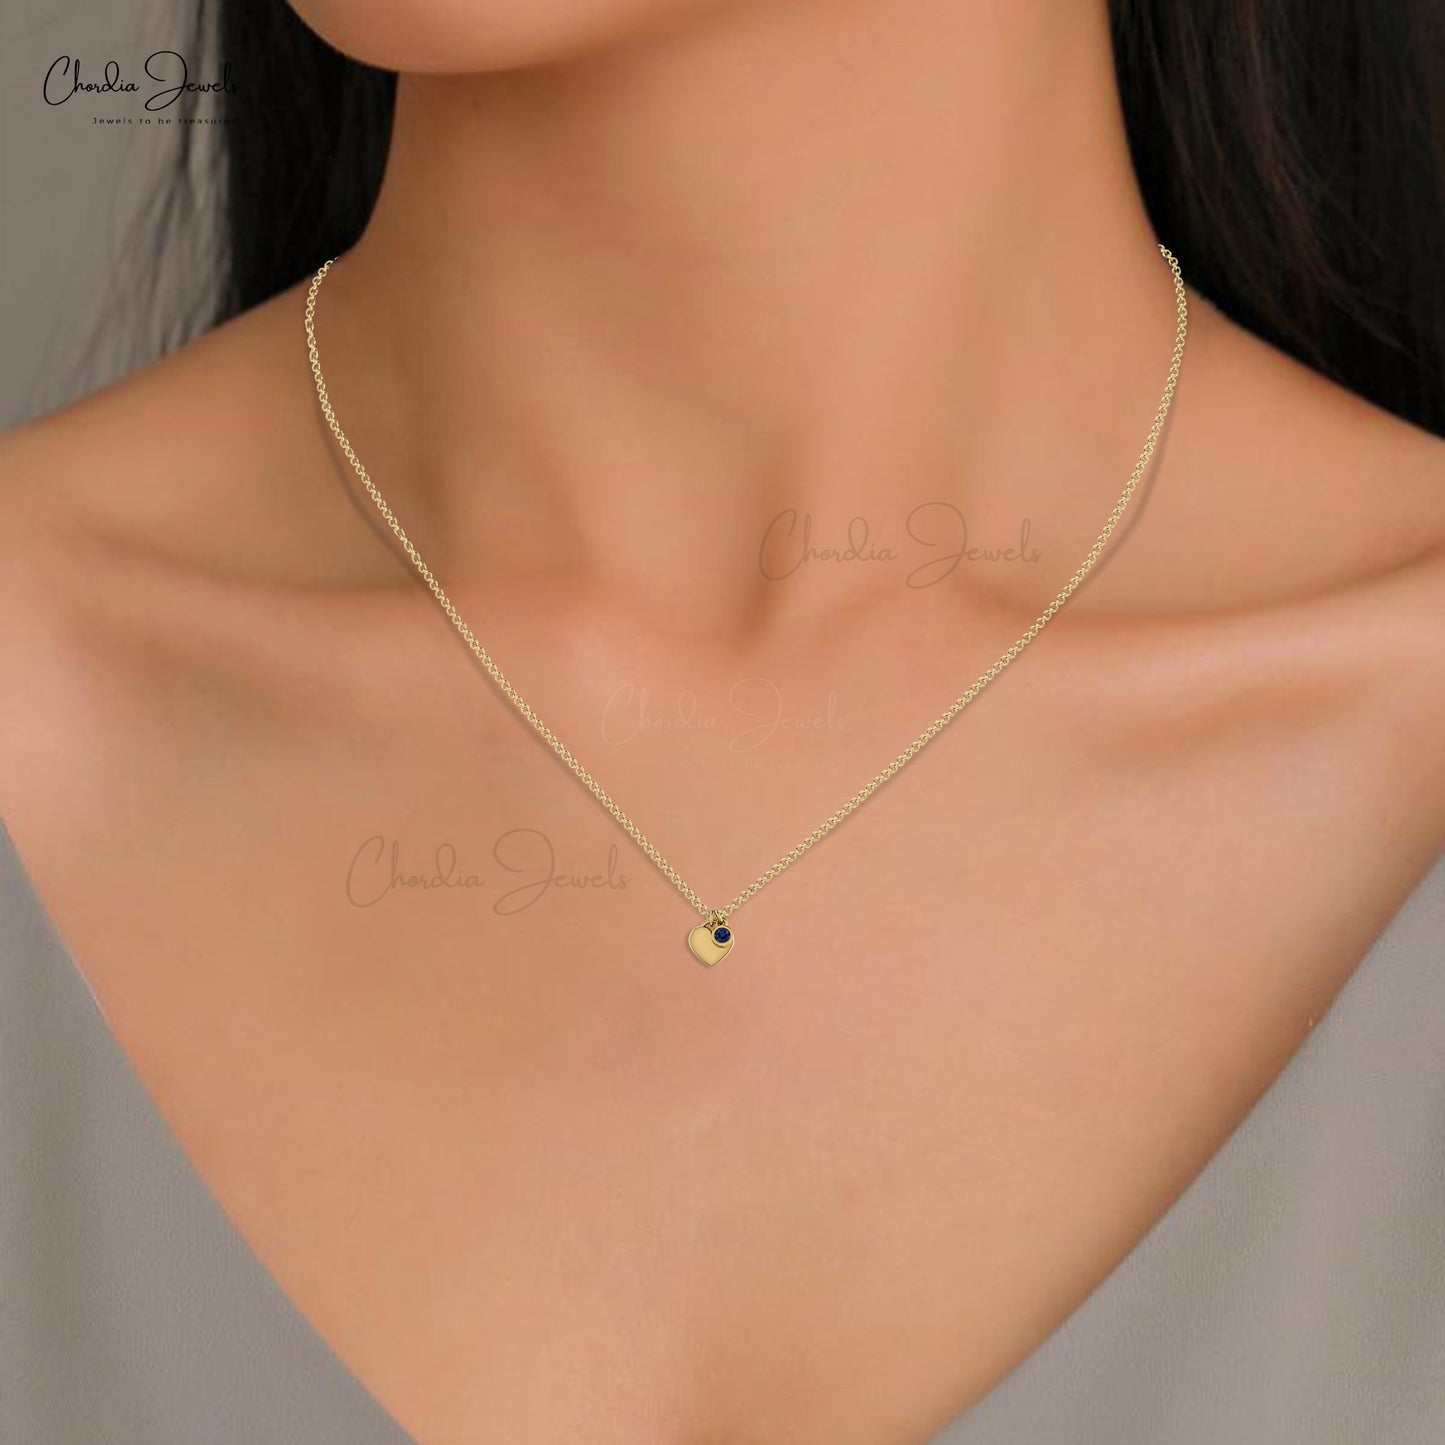 Load image into Gallery viewer, Natural Blue Sapphire Necklace, 14k Solid Gold Bezel Set Necklace, 3mm Round Cut Gemstone Necklace Gift for Her
